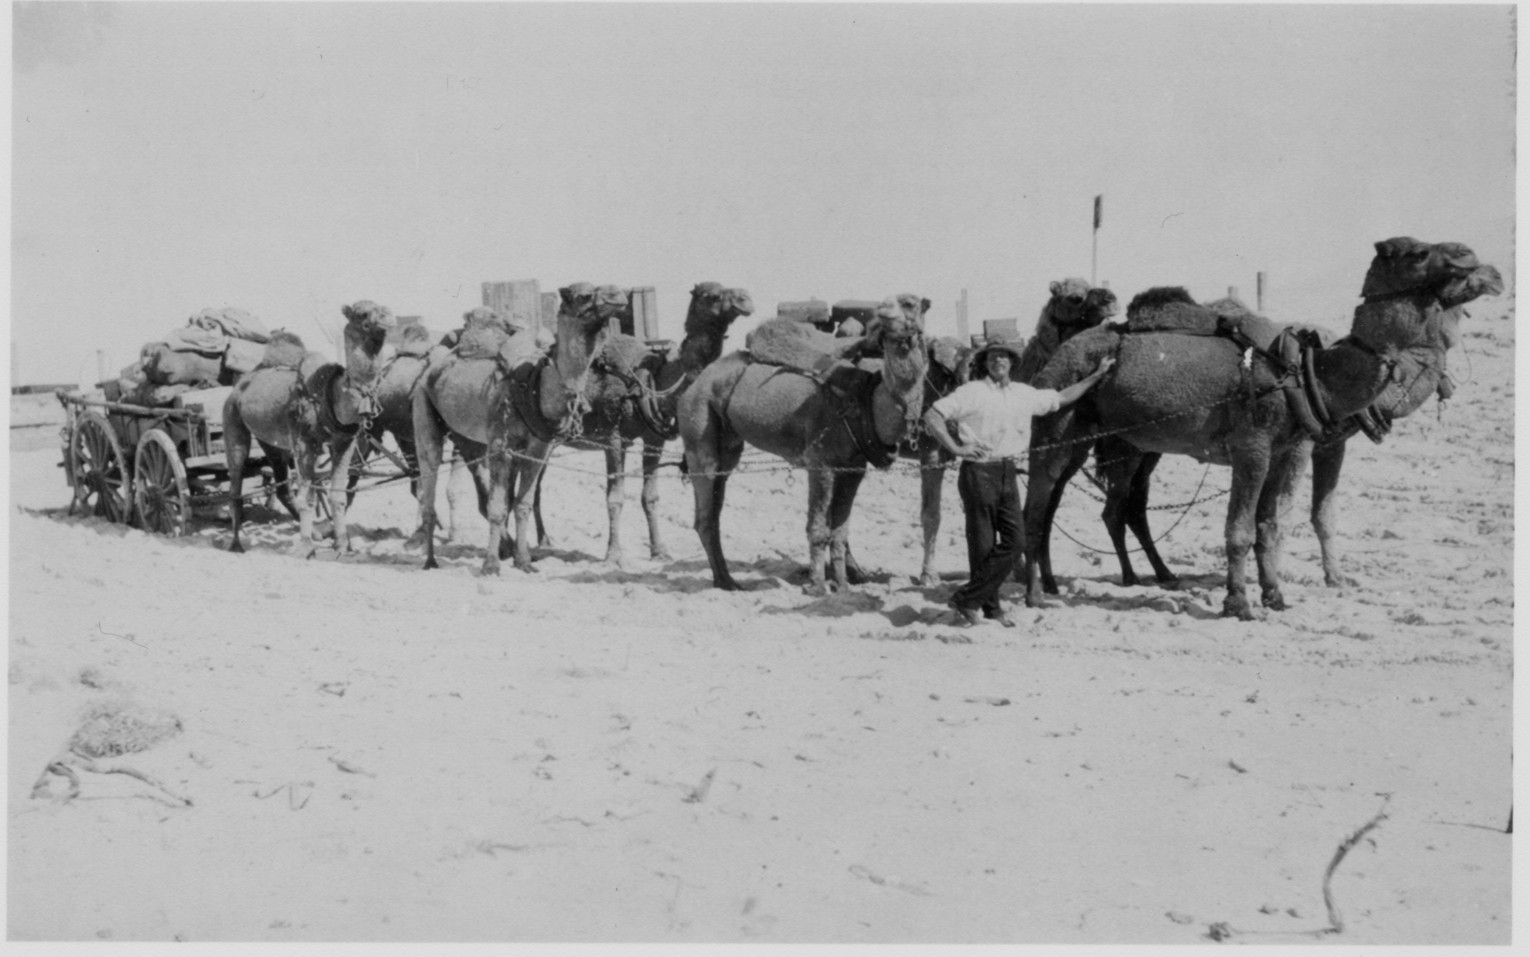 Camel train with equipment for Edward Kidson's magnetic survey work in Western Australia, mid-1914. His instruments included a theodolite-magnetometer similar to those now in the National Historical Collection. Image: Carnegie Institution of Washington, Department of Terrestrial Magnetism